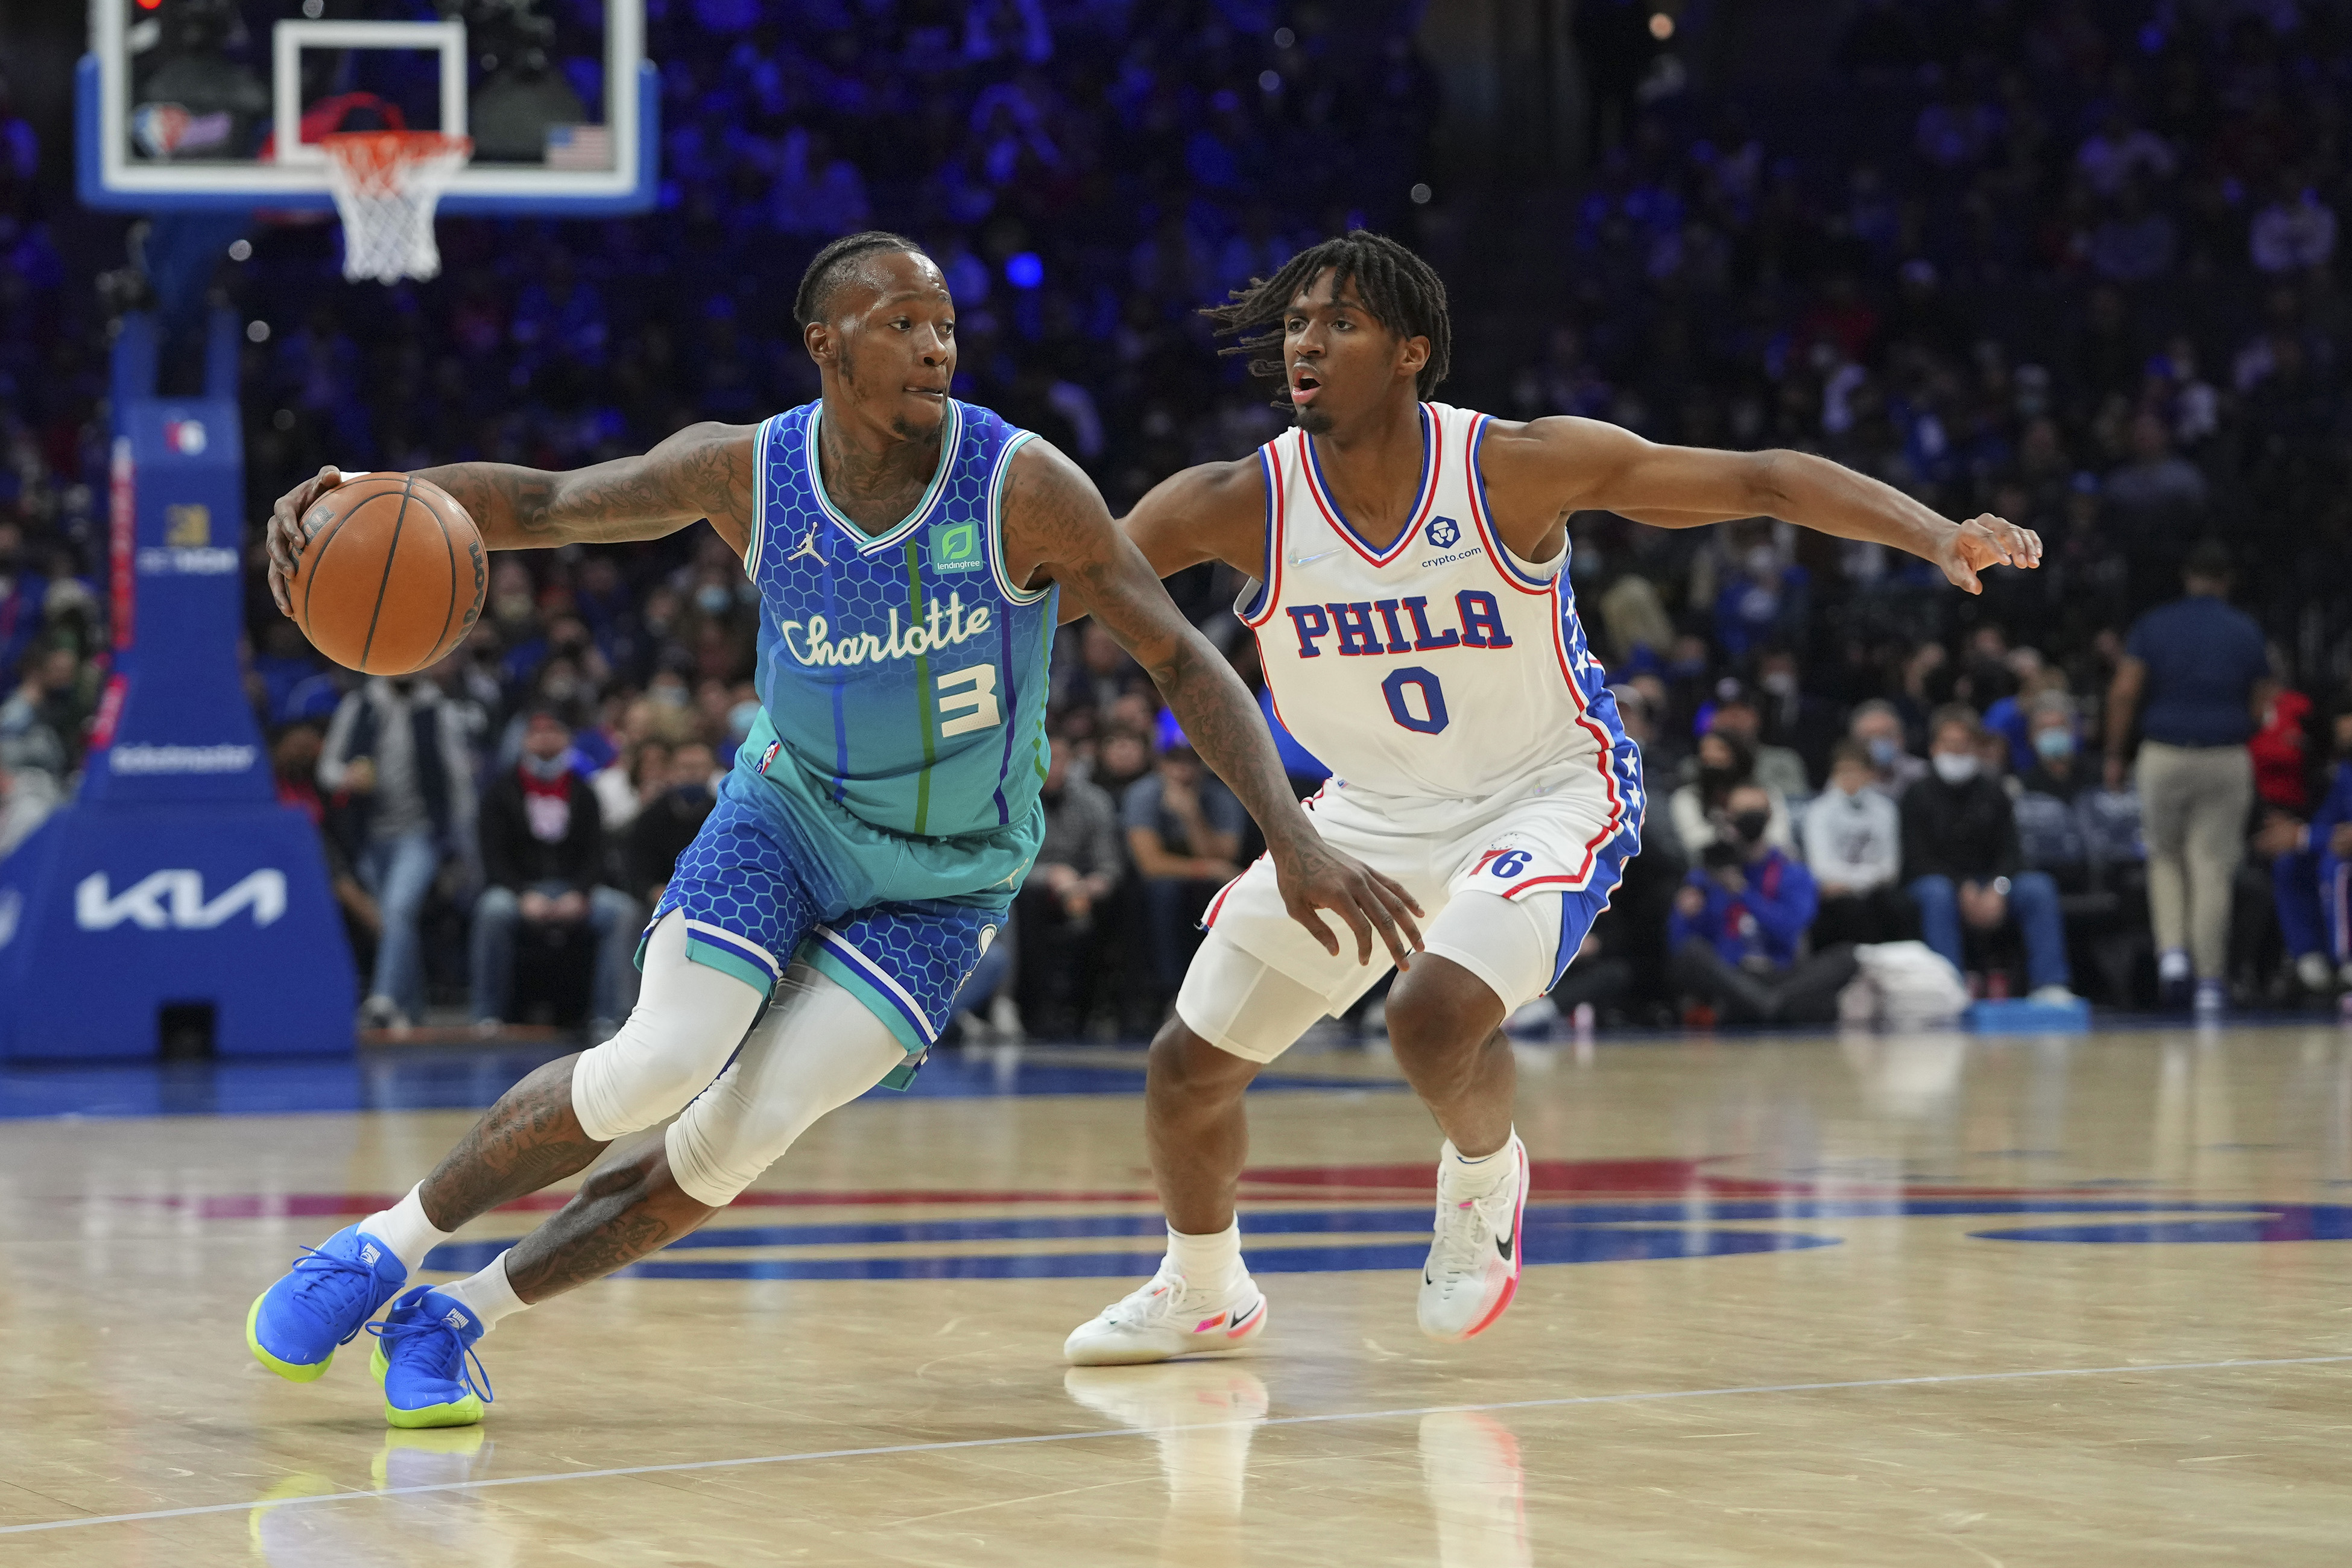 Charlotte Hornets guard Terry Rozier (3) drives to the basket against Philadelphia 76ers guard Tyrese Maxey (0) in the first half at the Wells Fargo Center.